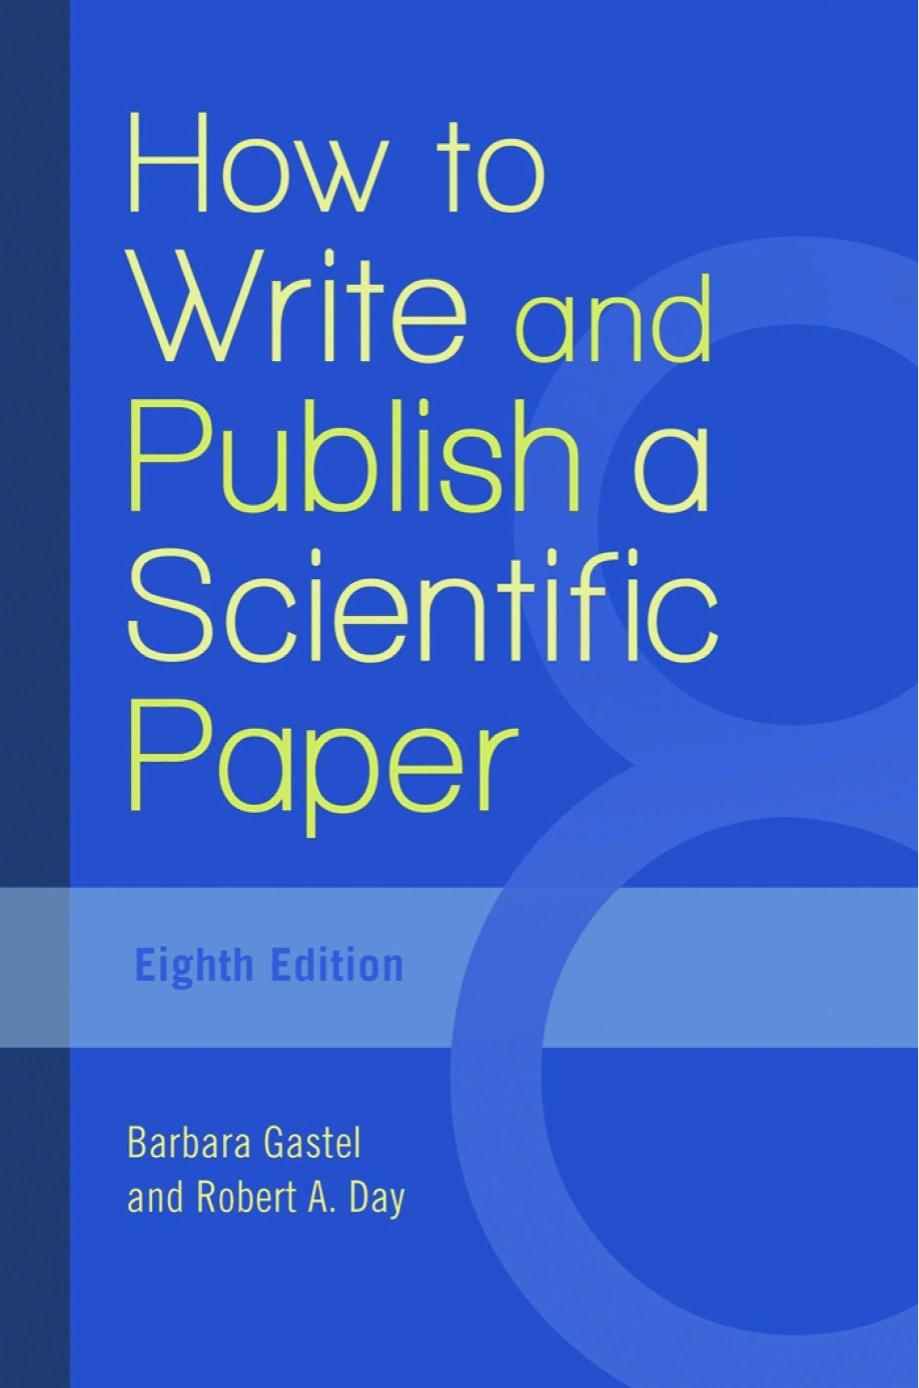 How to Write and Publish a Scientific Paper, Eighth Edition